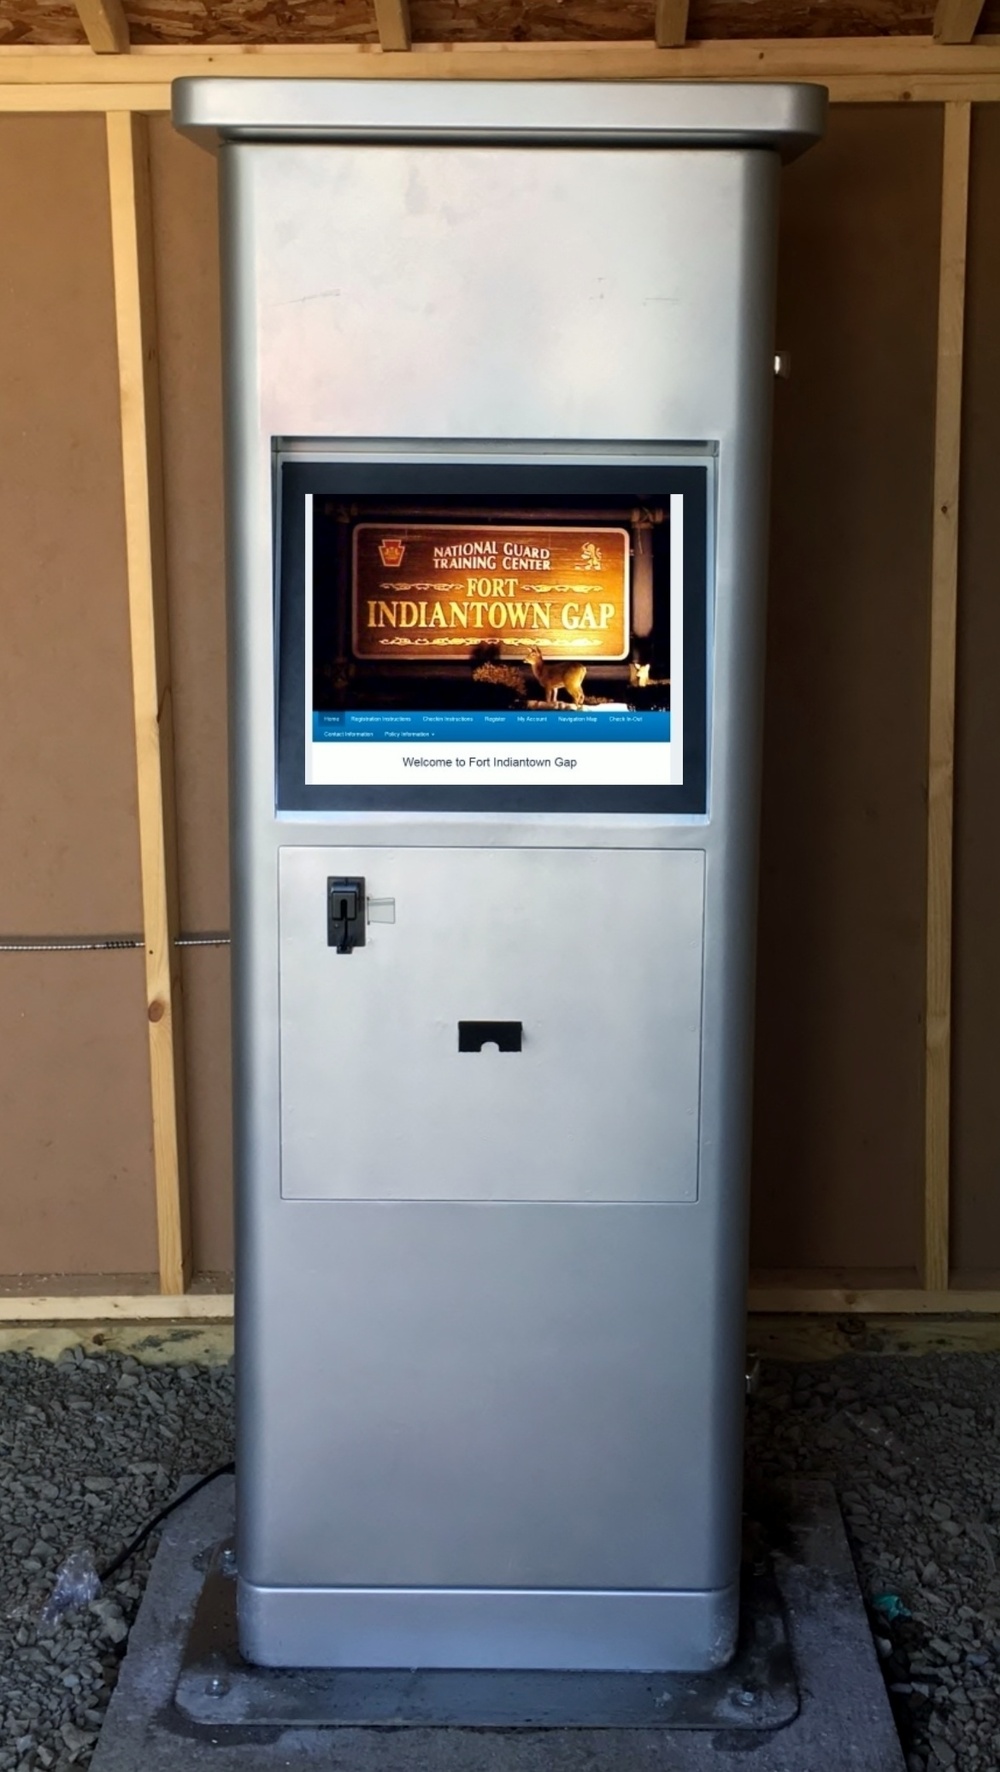 Fort Indiantown Gap launches online safety briefings and payments for outdoor recreation; New kiosk for check in and check out